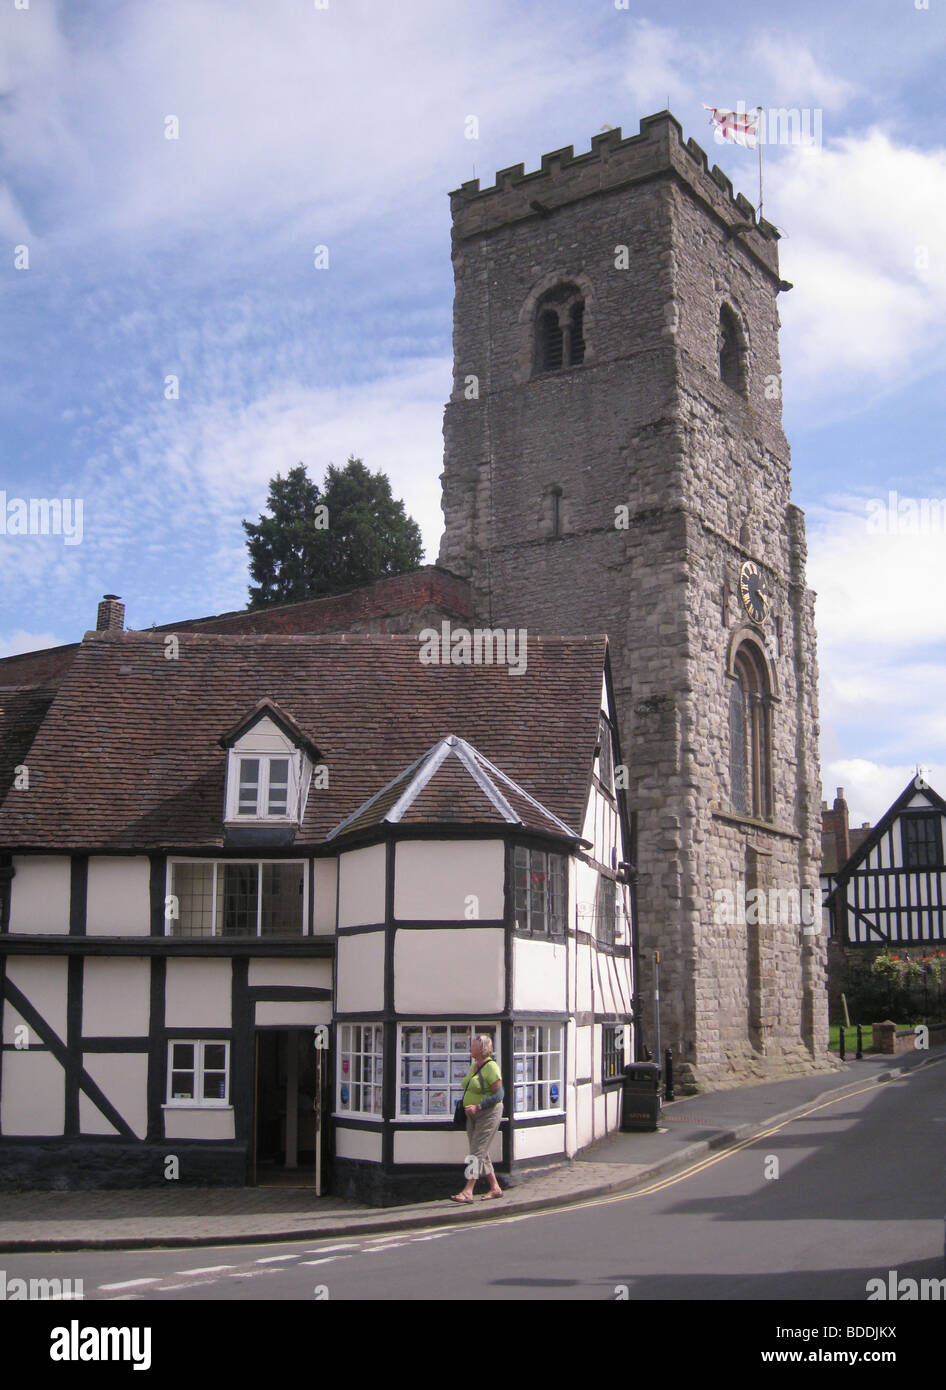 MUCH WENLOCK, Shropshire, England - The tower of Holy Trinity Church Stock Photo